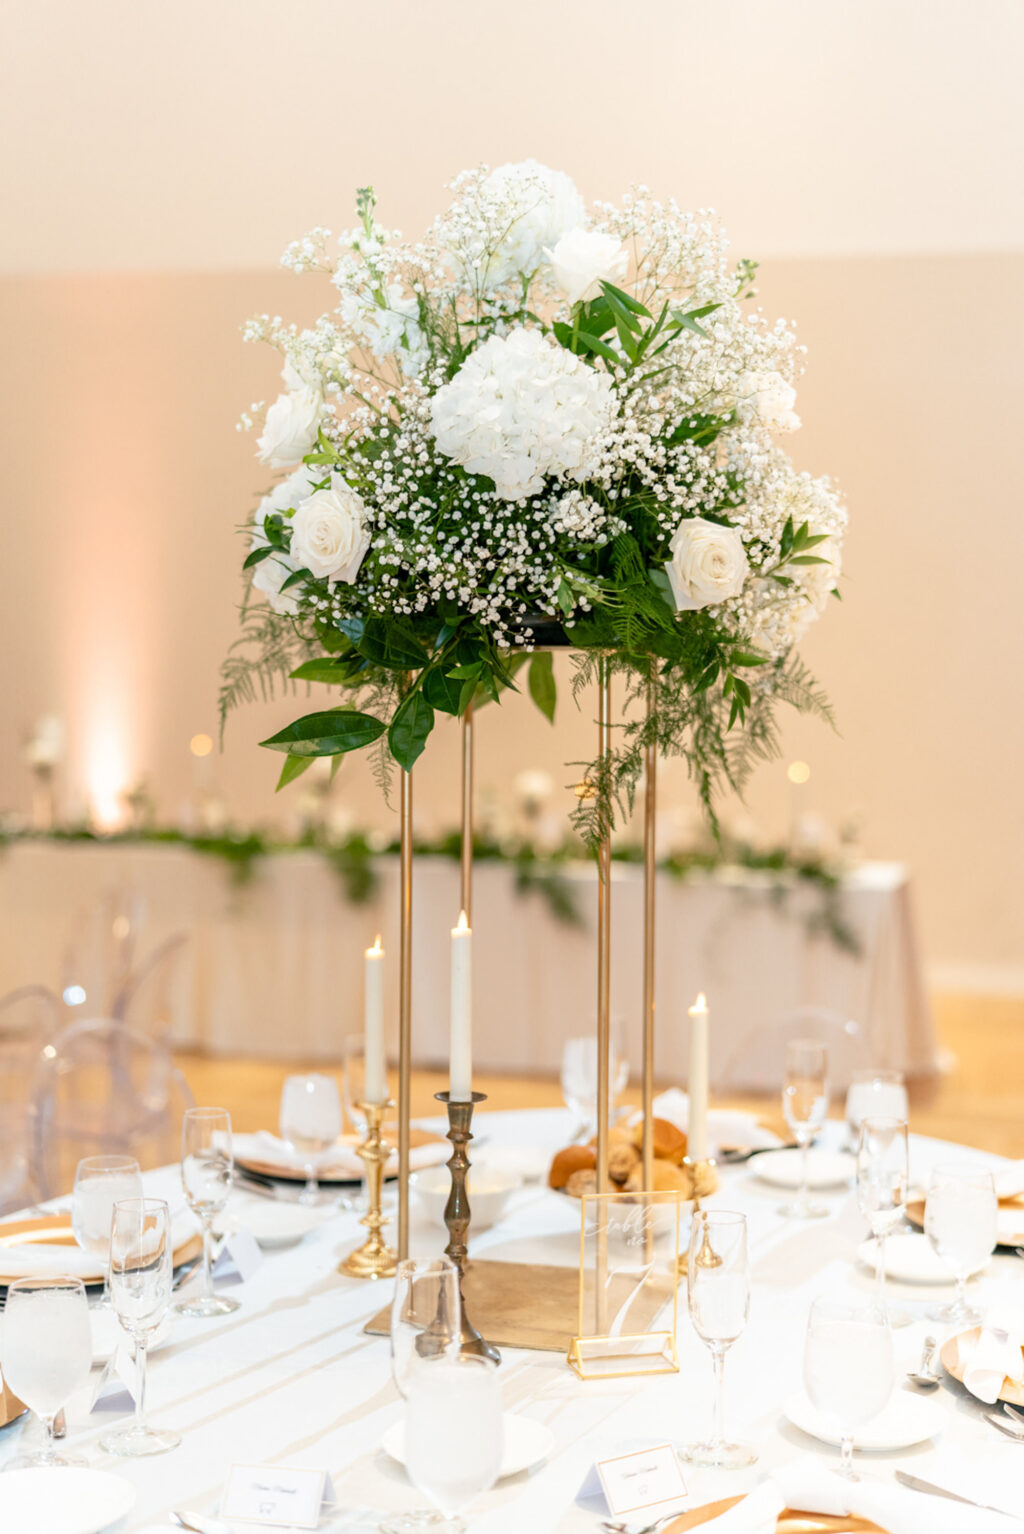 Tall Gold Flower Stand with Hydrangeas, White Roses, and Baby's Breath Centerpiece Ideas | White and Gold Wedding Reception Table Setting Inspiration